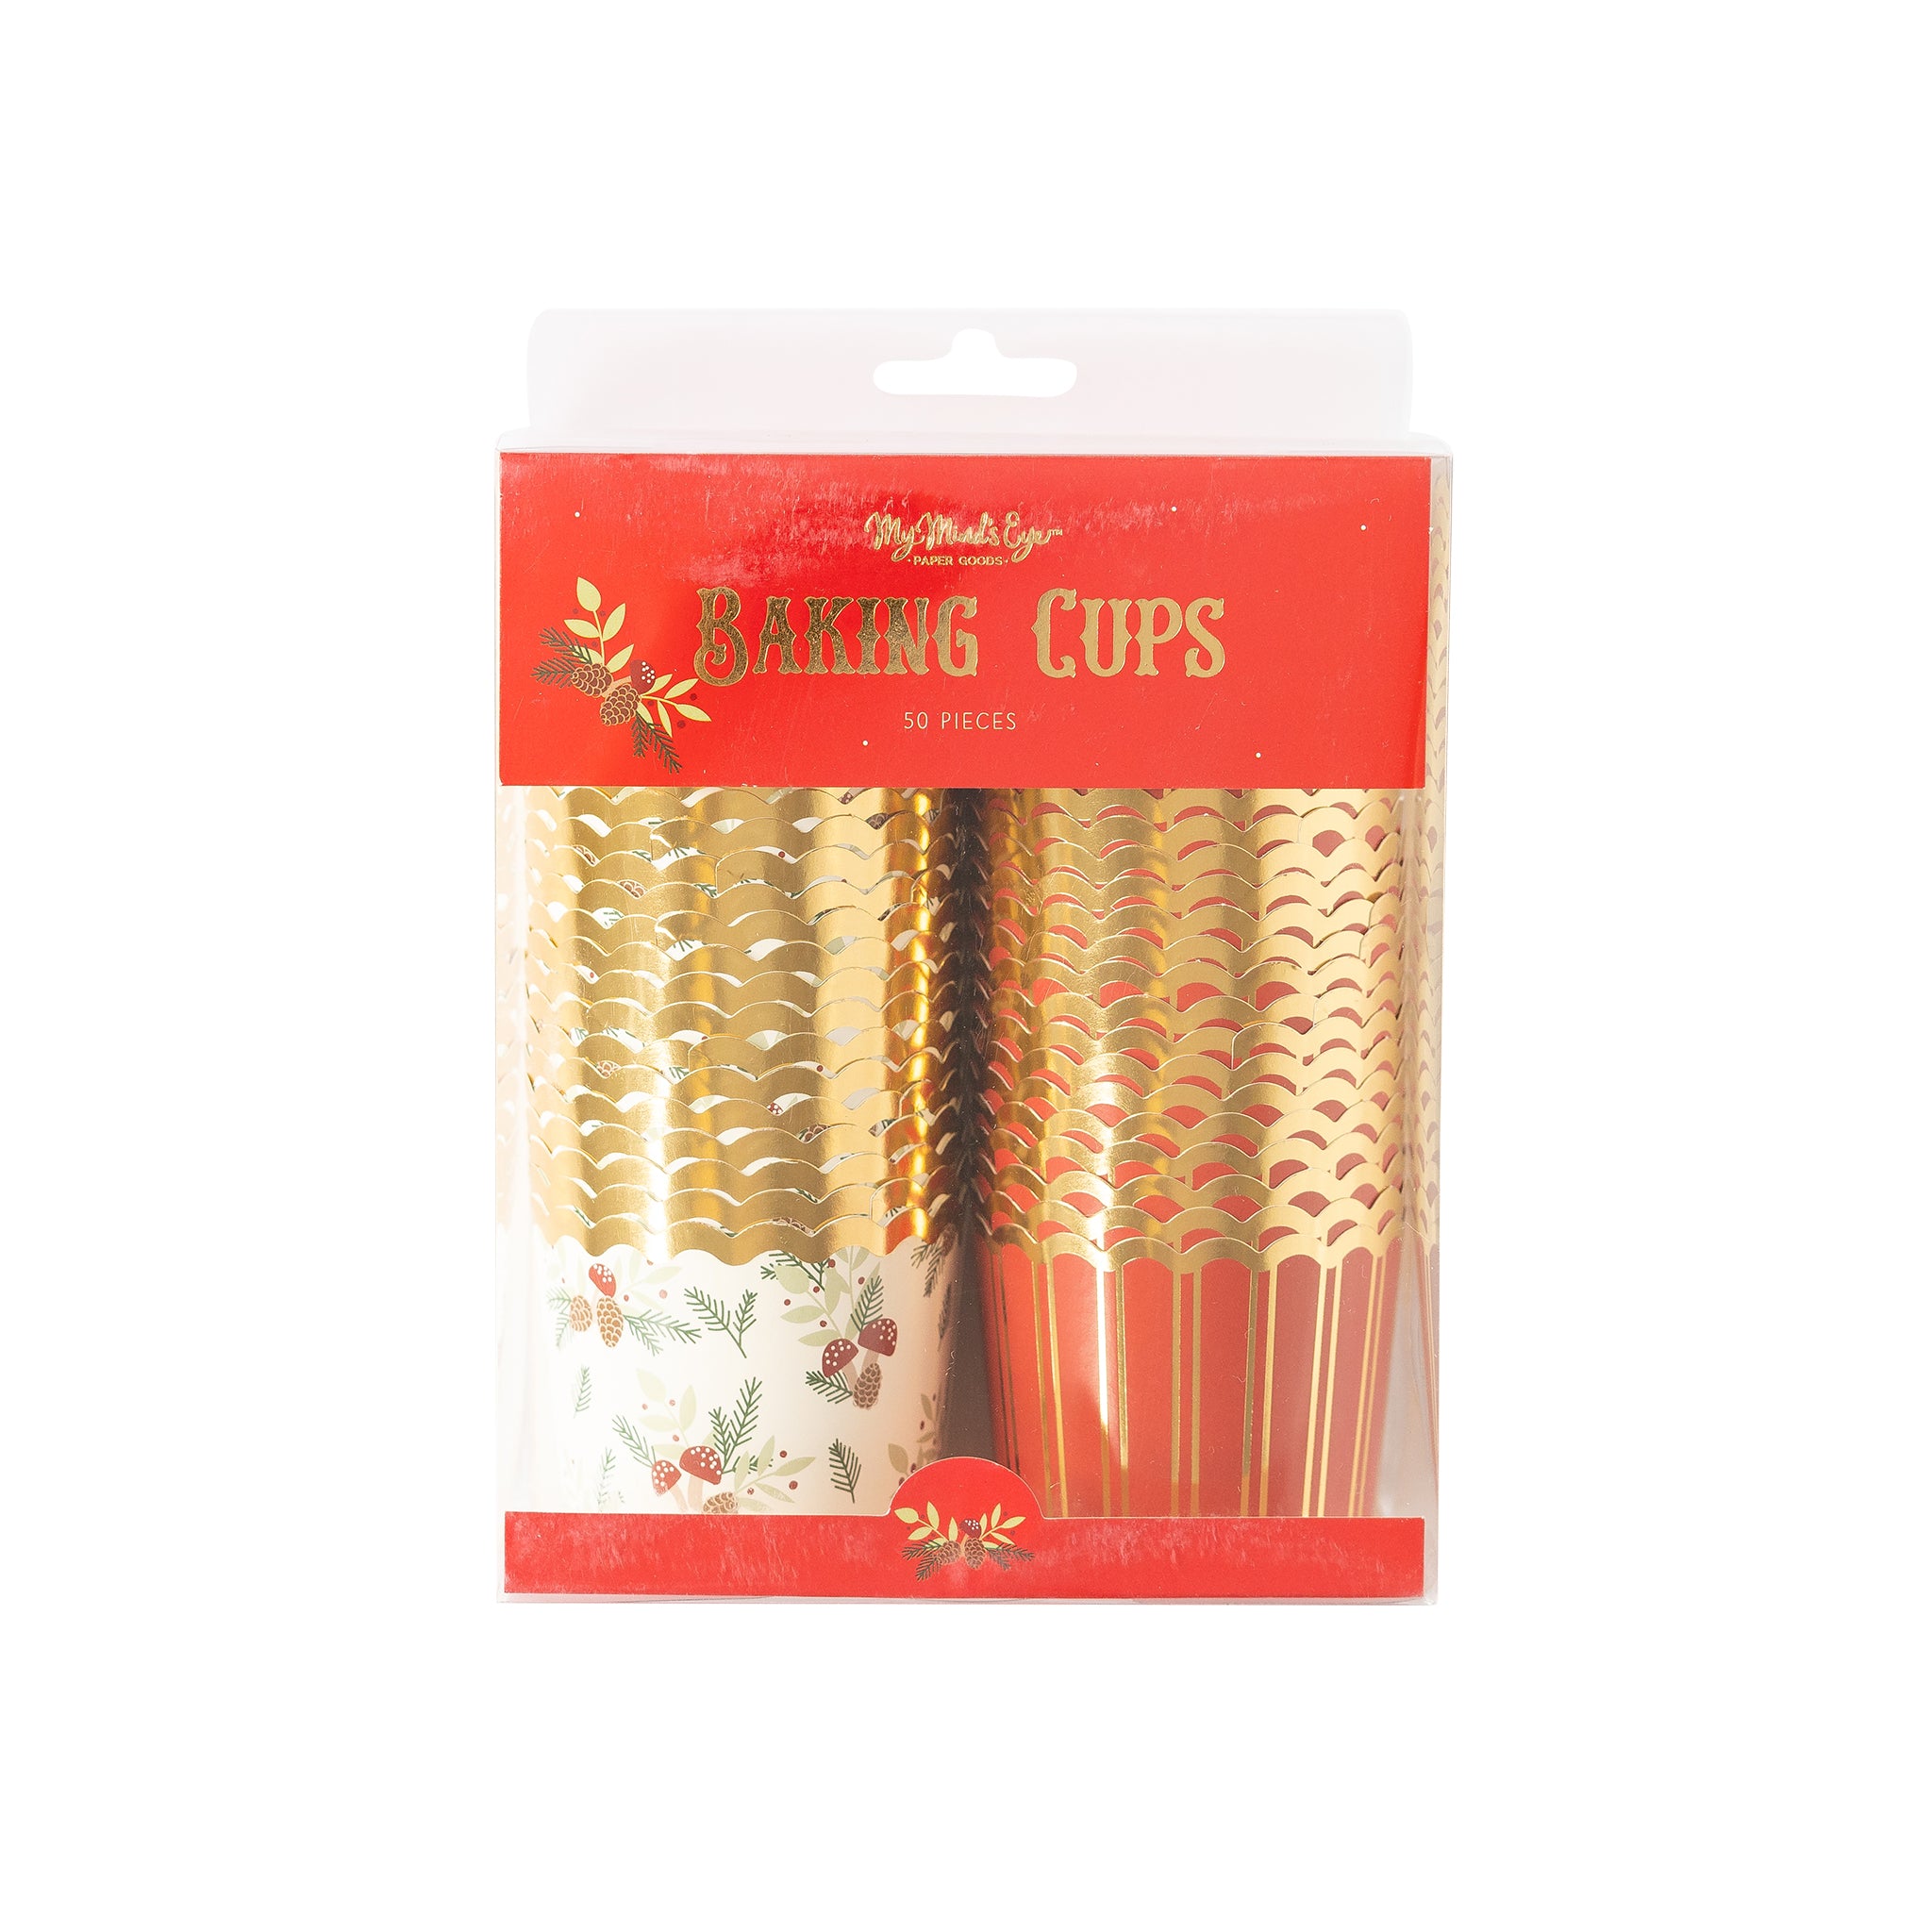 50pcs Simple Disposable Cup, Red Paper Cup, For Party